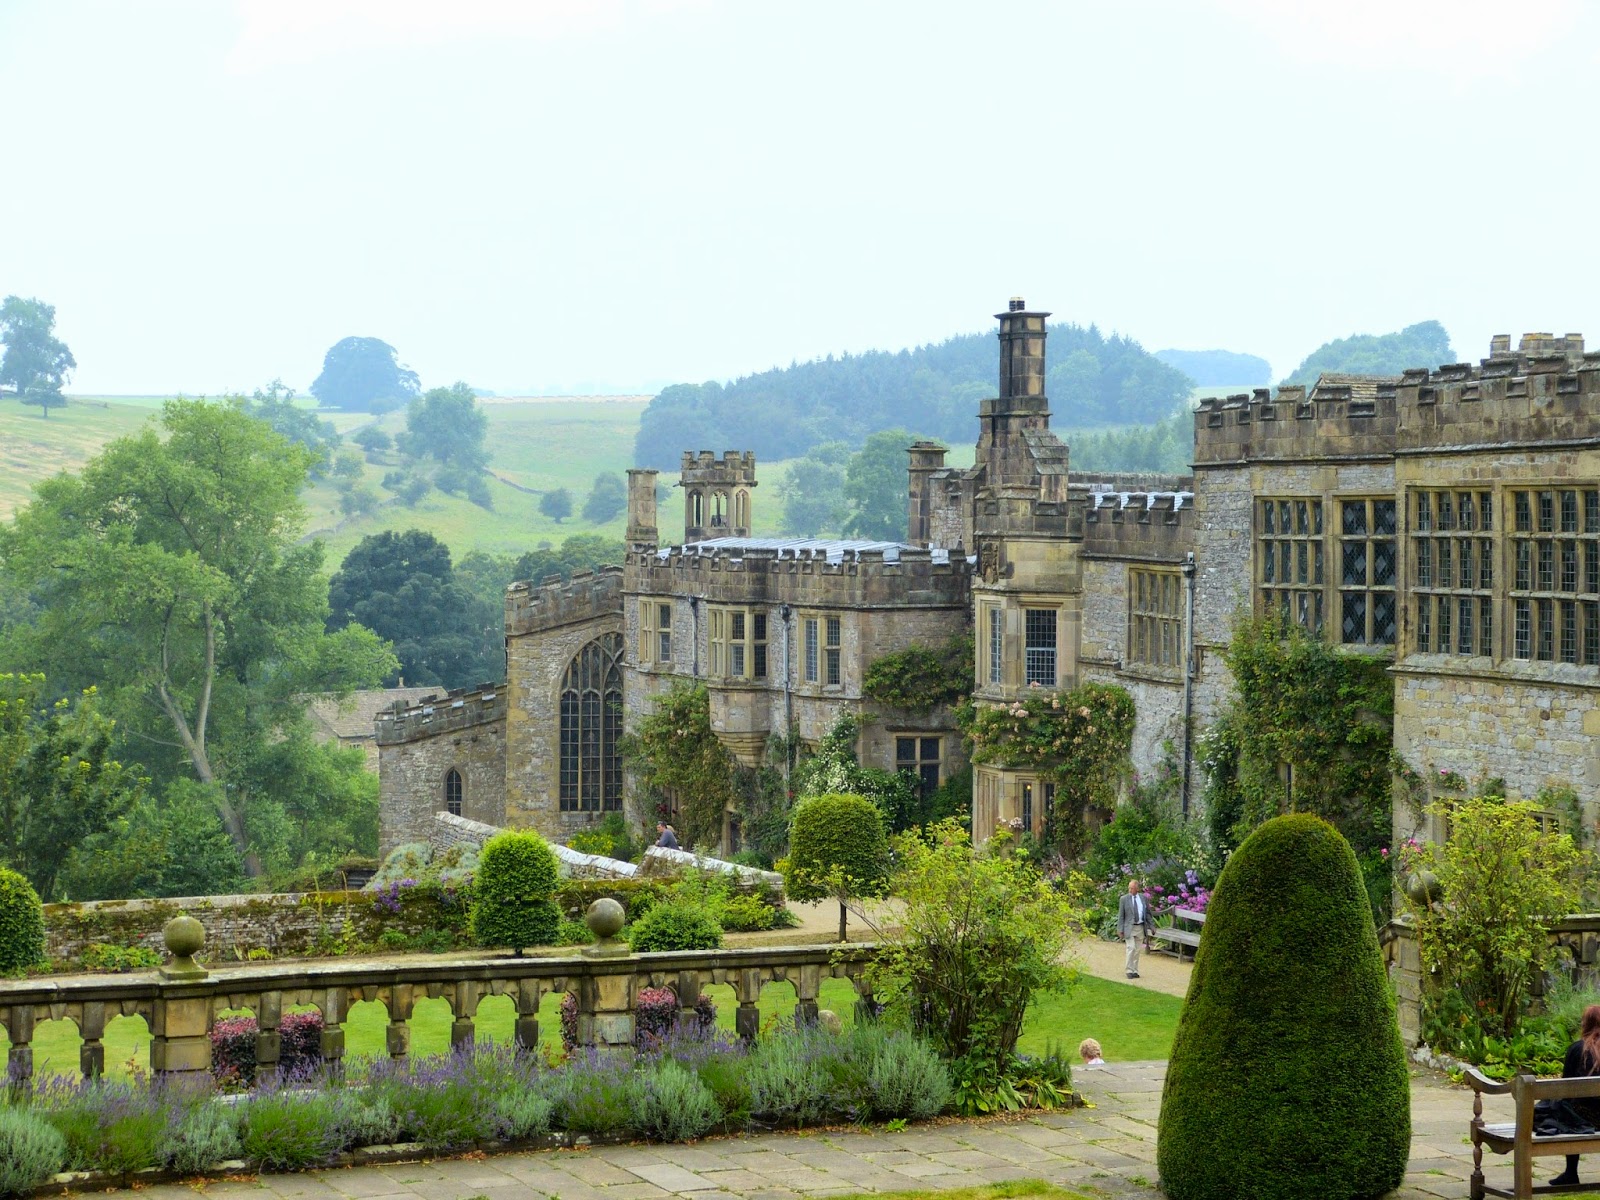 Haddon Hall from the gardens